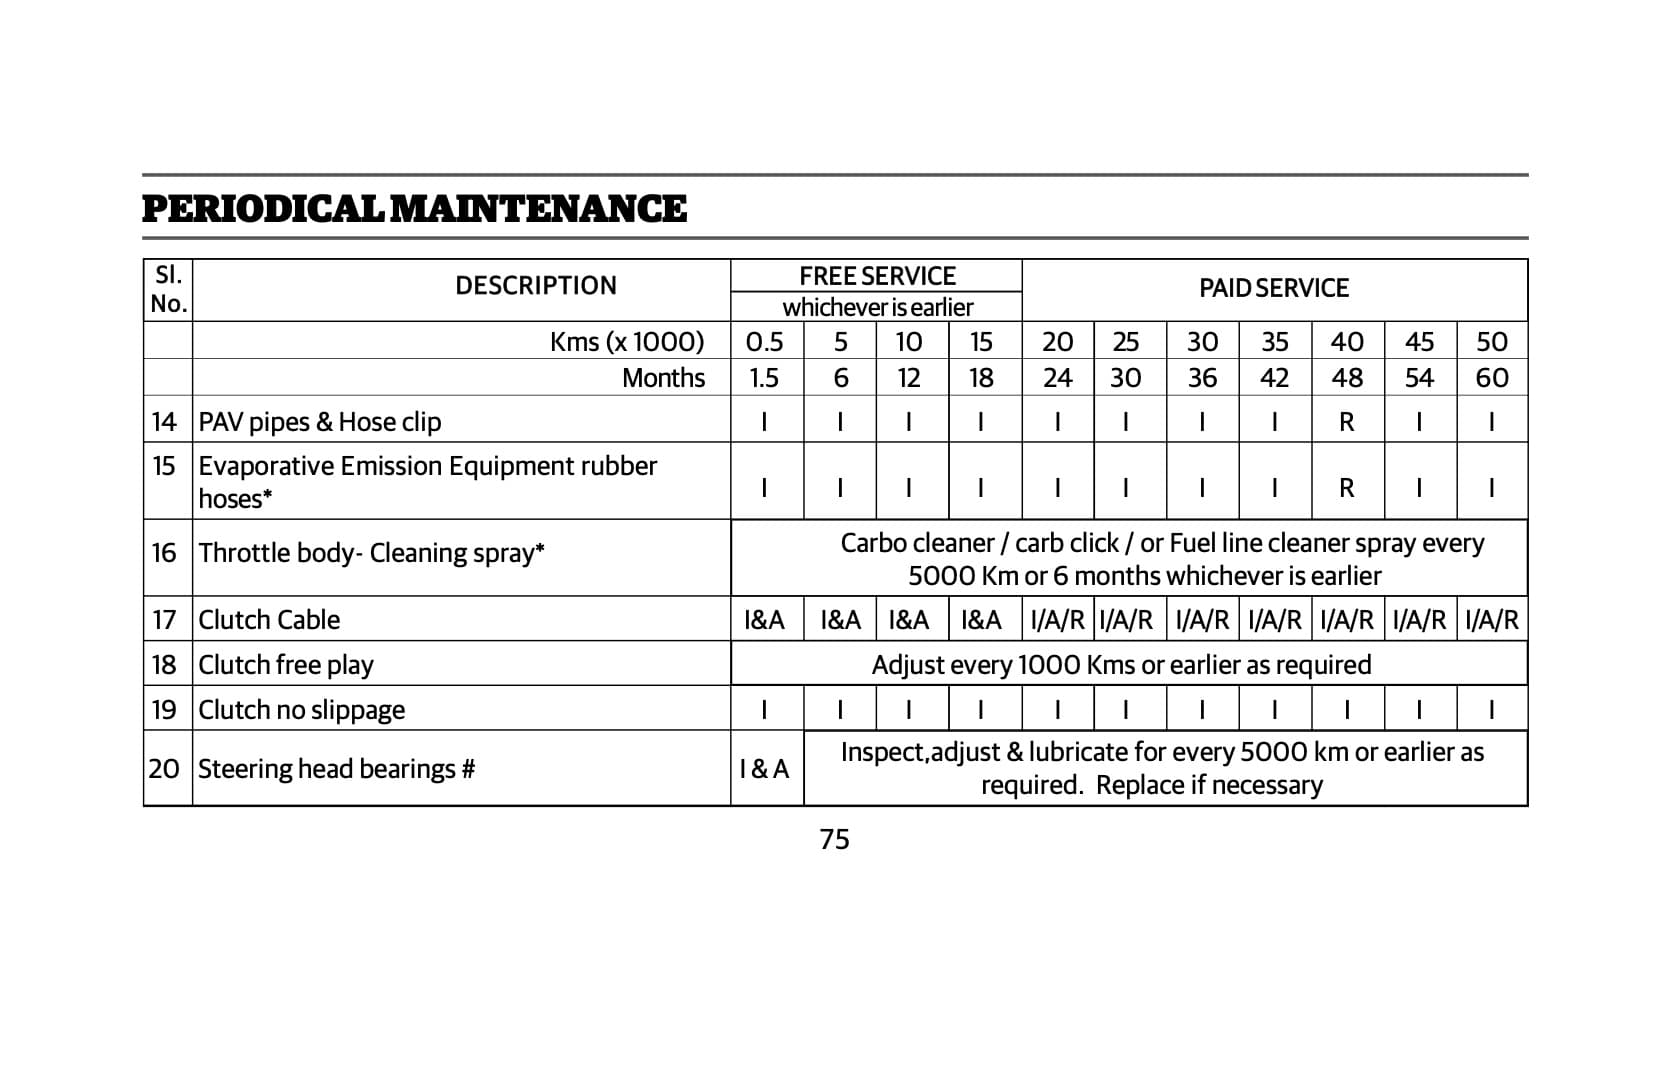 Royal Enfield Himalayan maintenance schedule old version carb cleaner